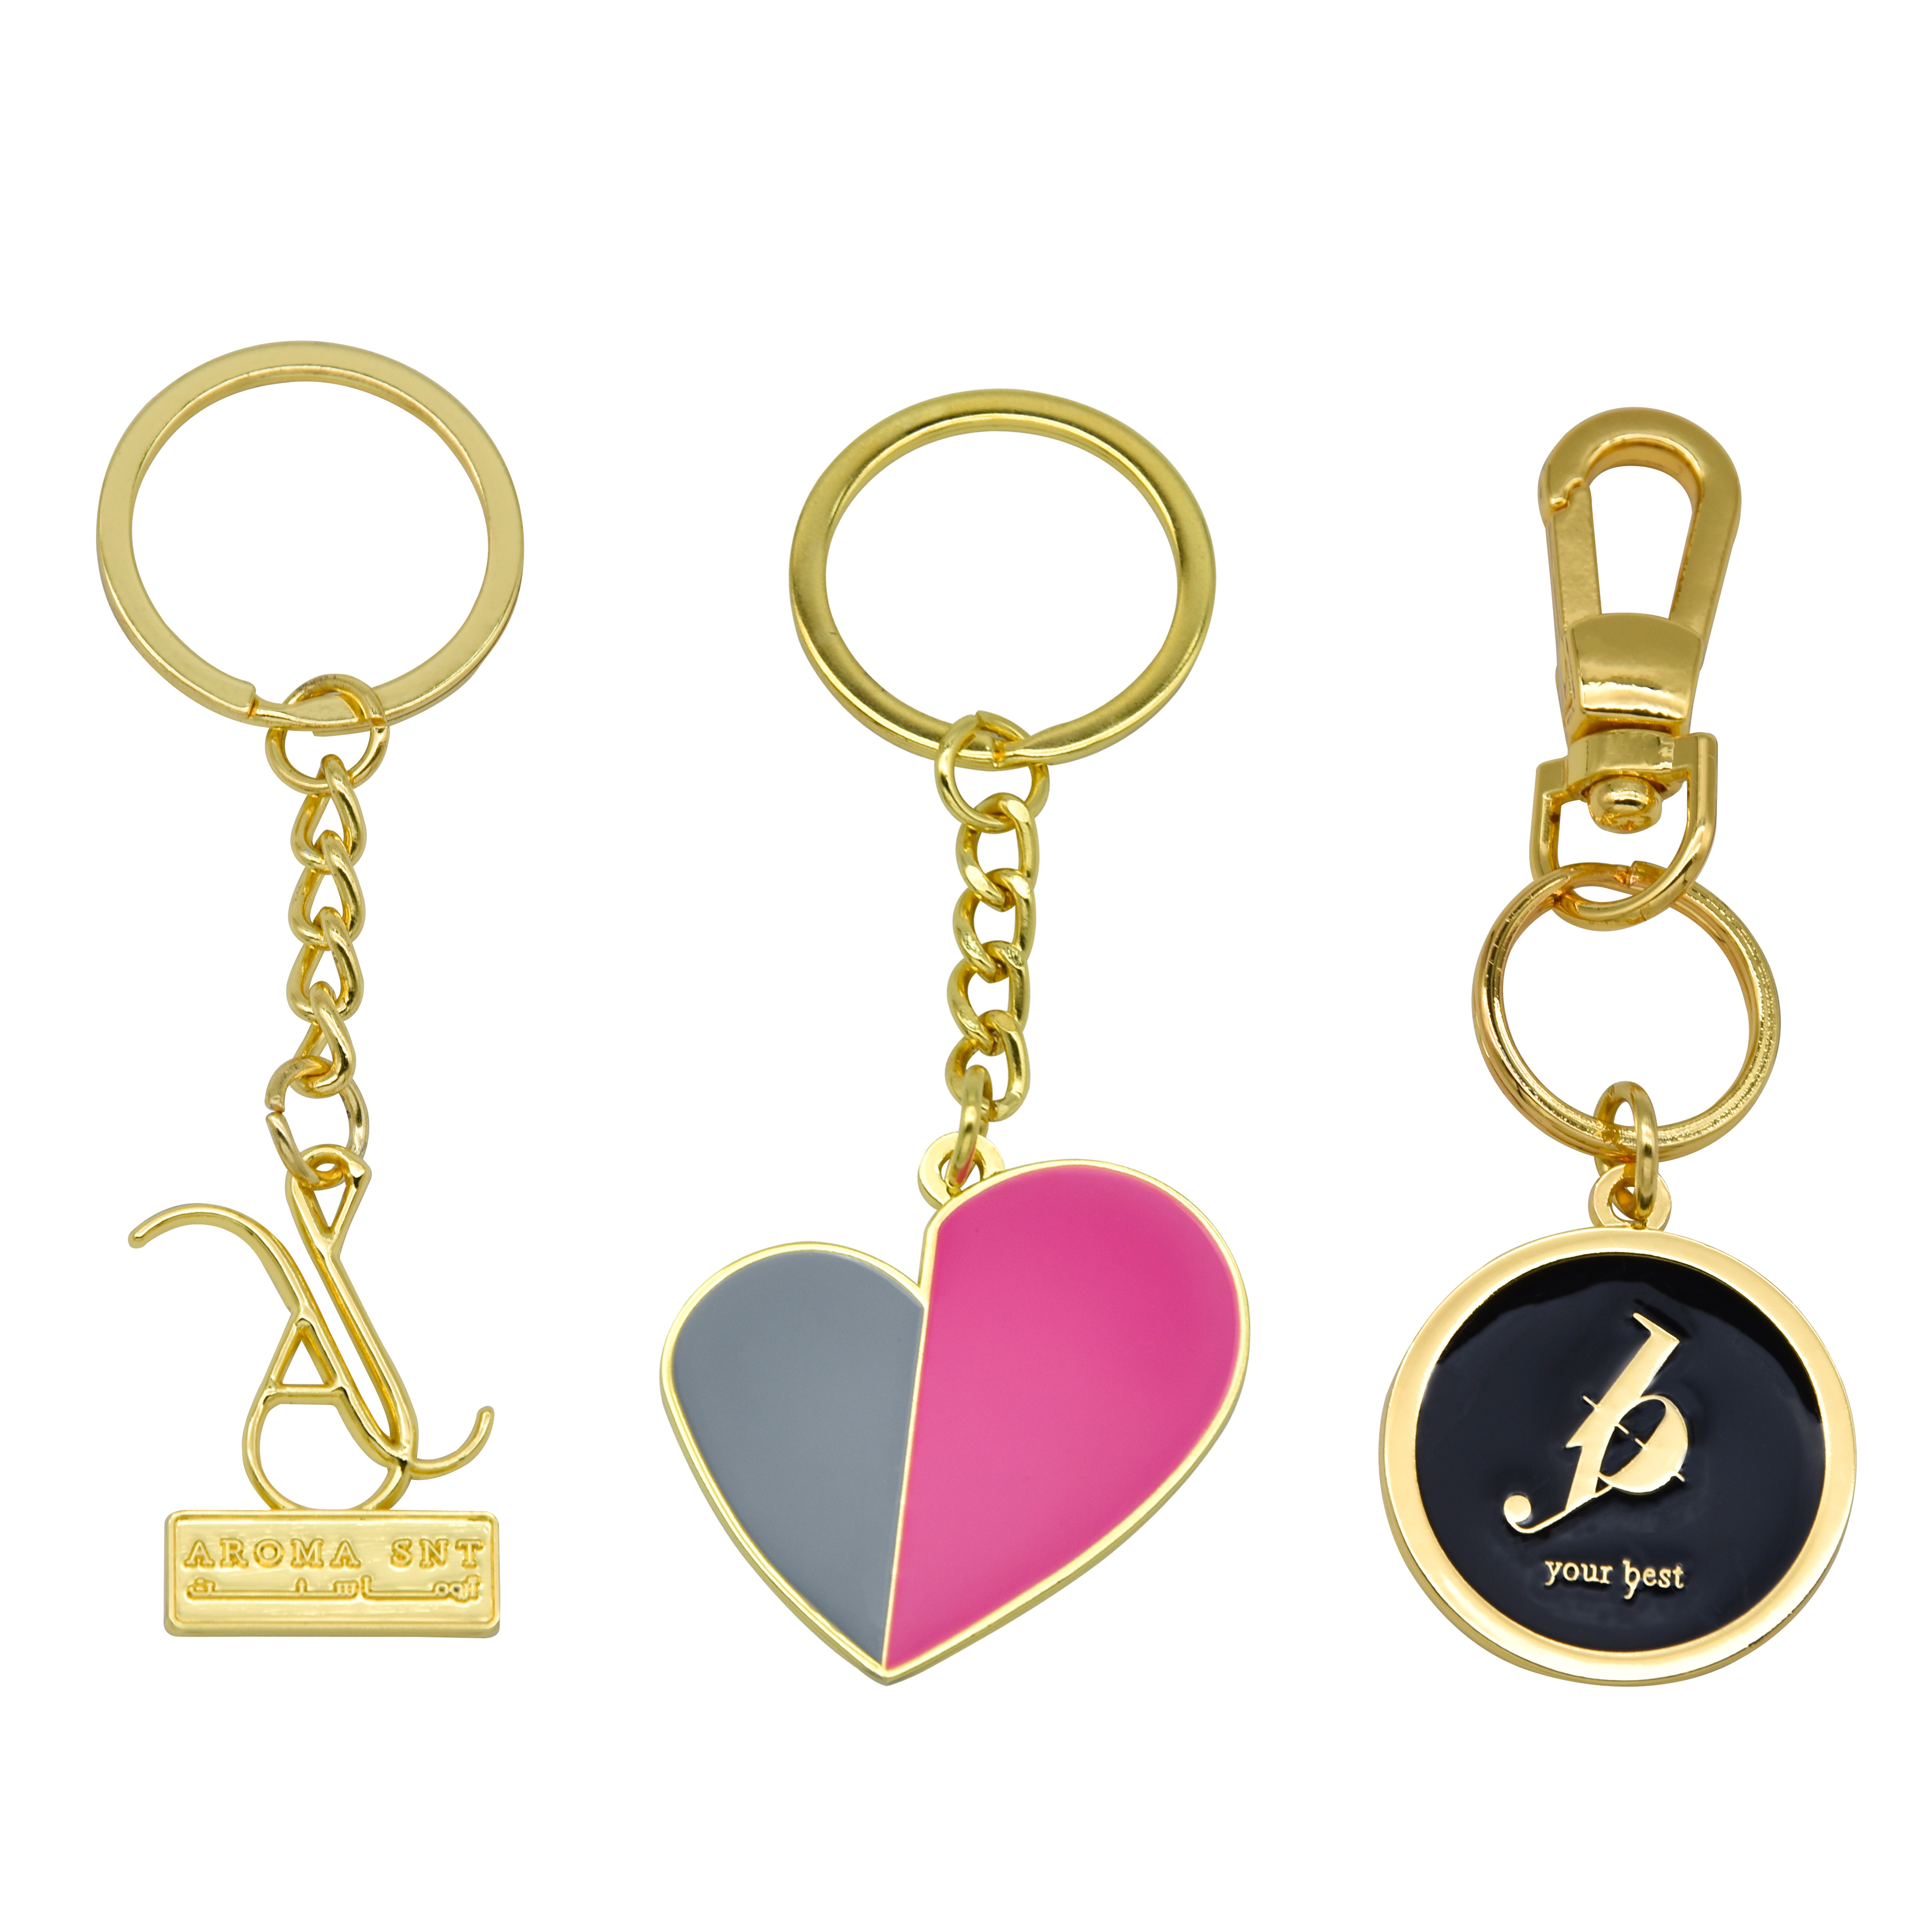 Keychain Medal Metal Custom Engraved Logo Gold Key Chain Featured Image